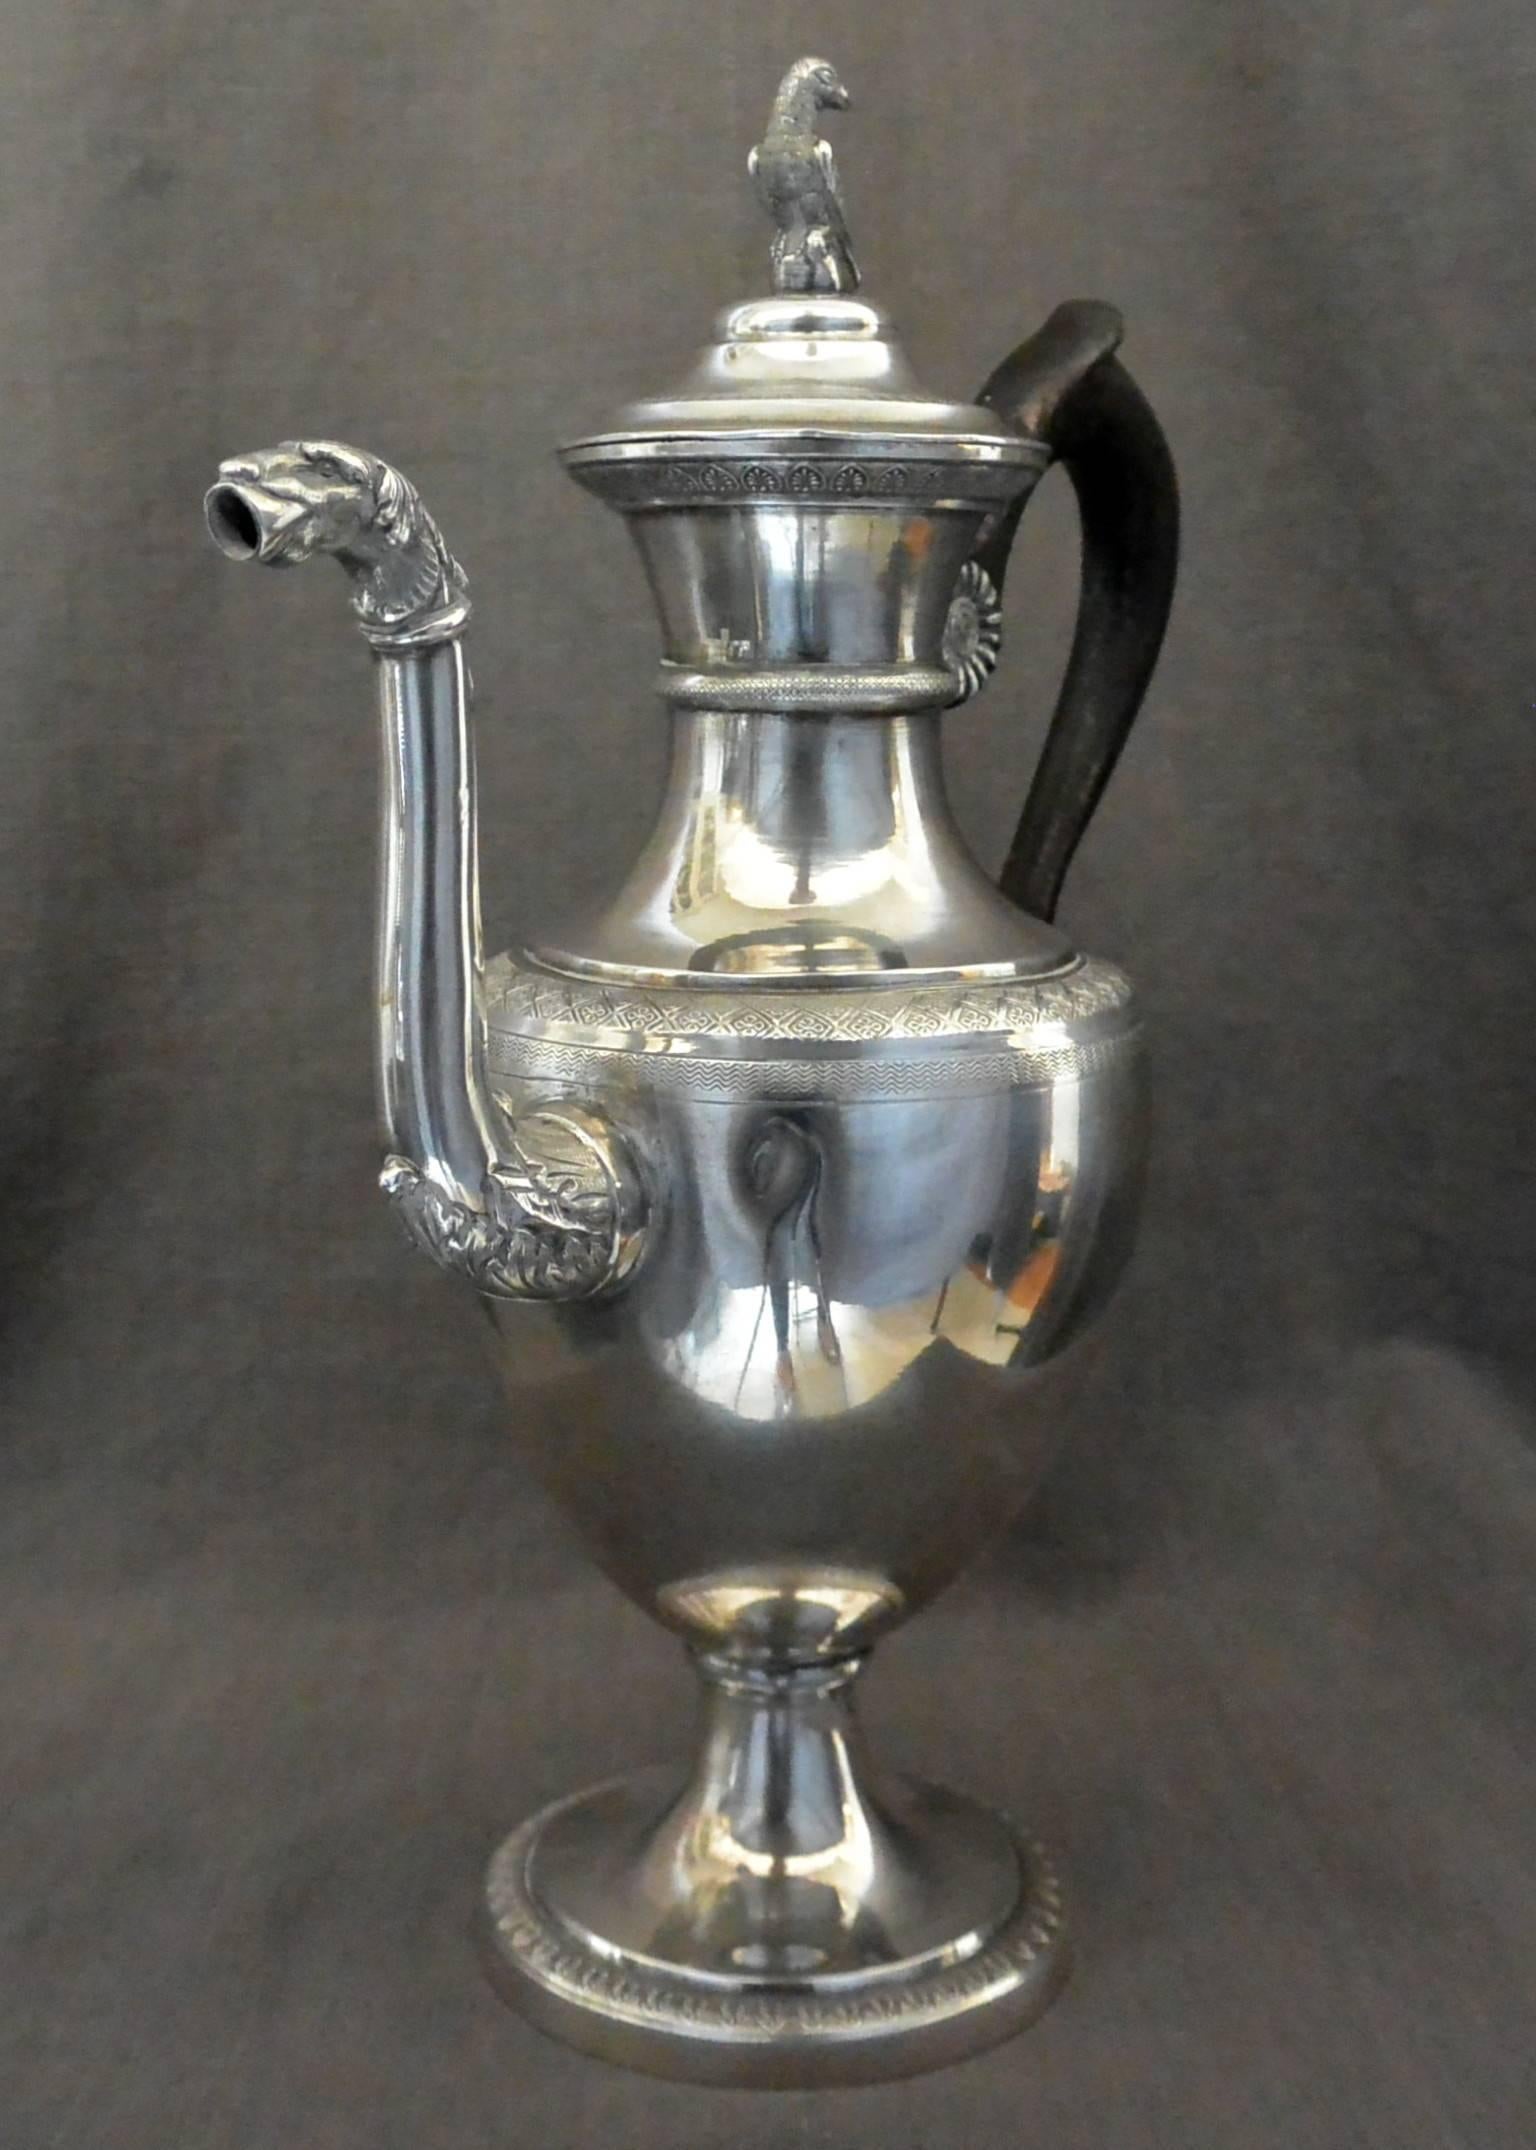 Italian Neoclassical Silver Coffee Pot. Neapolitan caffettiera in sterling silver with wood handle of neoclassical form and decoration with parrot lid and canine spout; with Italian sterling hallmarks, Italy, early 1800s.
Dimension: Handle to spout